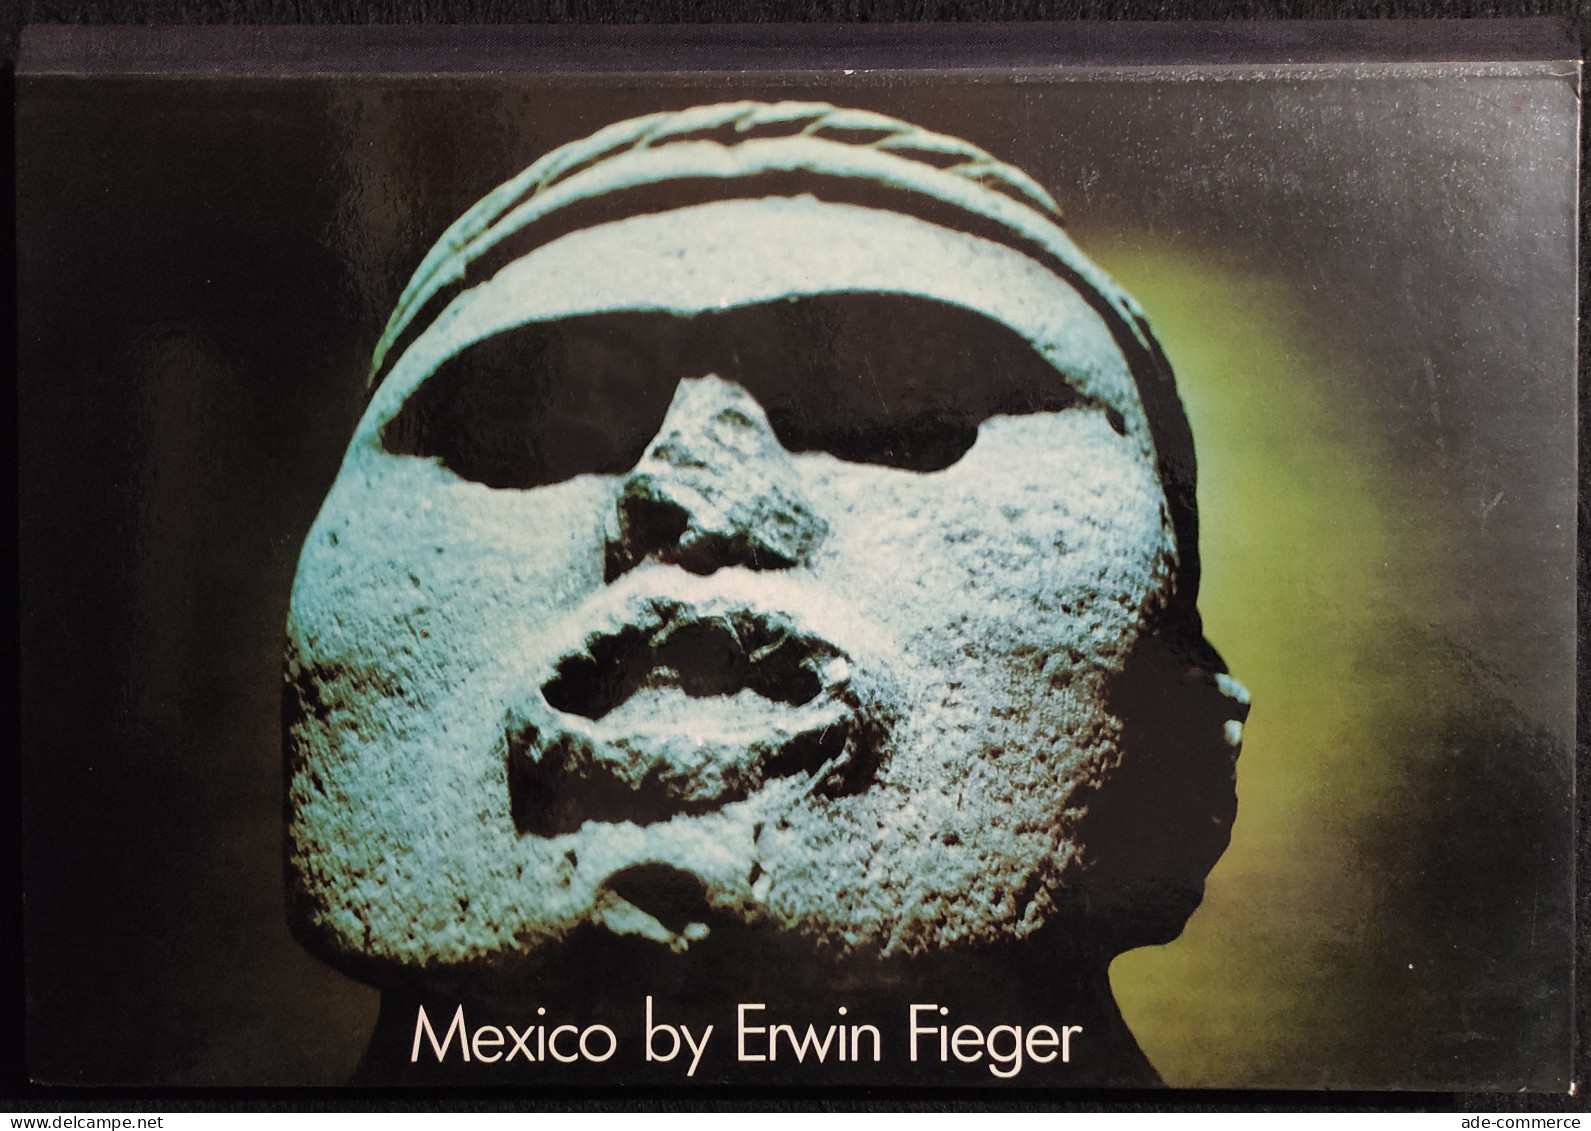 Mexico By Erwin Fieger - 1973 - Accidentia Druck- Und Verlags - Pictures